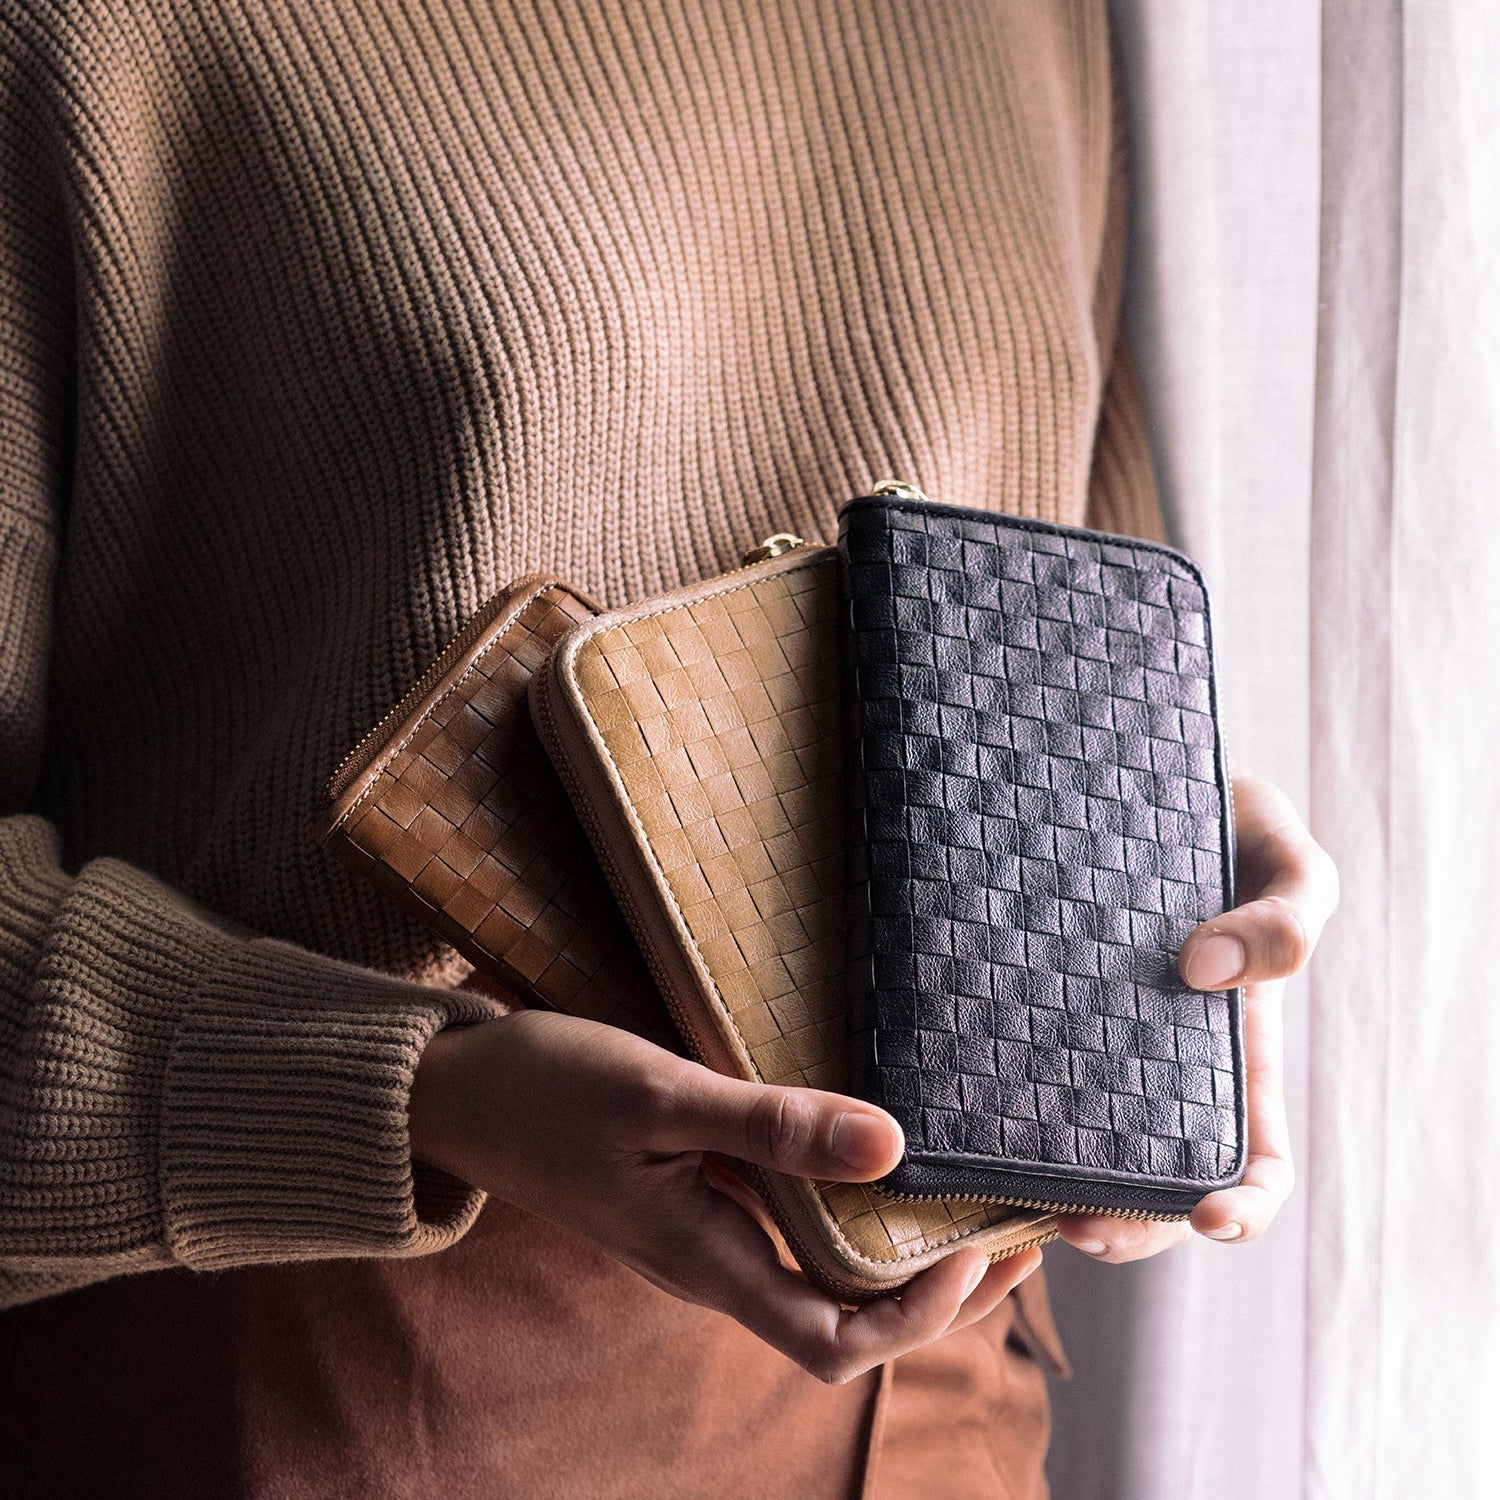 A woman is shown standing. In her hands she is holding three large zipped washable paper woven wallets. The wallets are dark tan, light camel and black in colour.